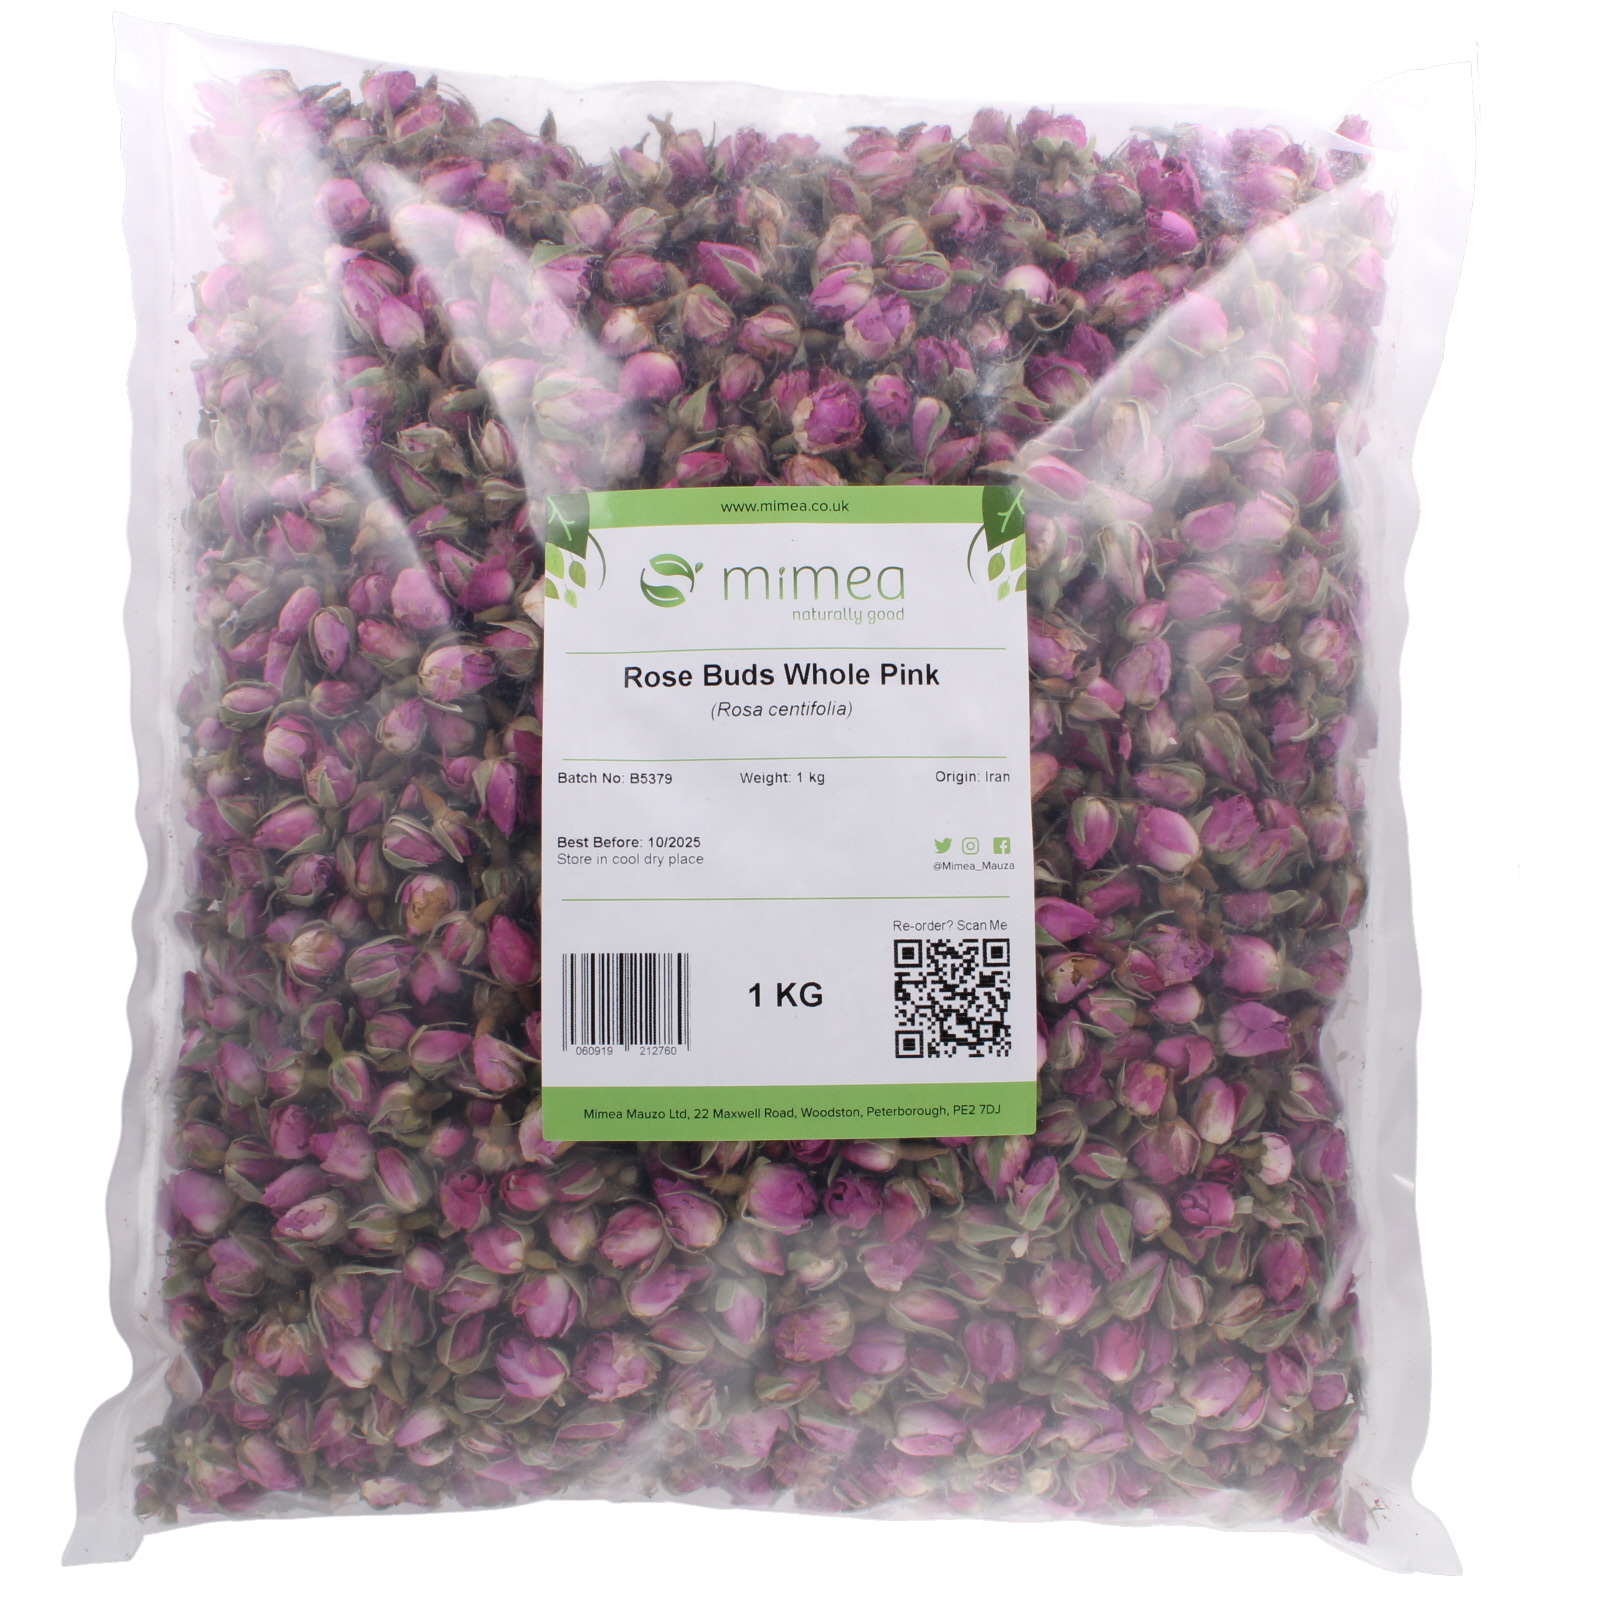 Rose Buds Whole Pink